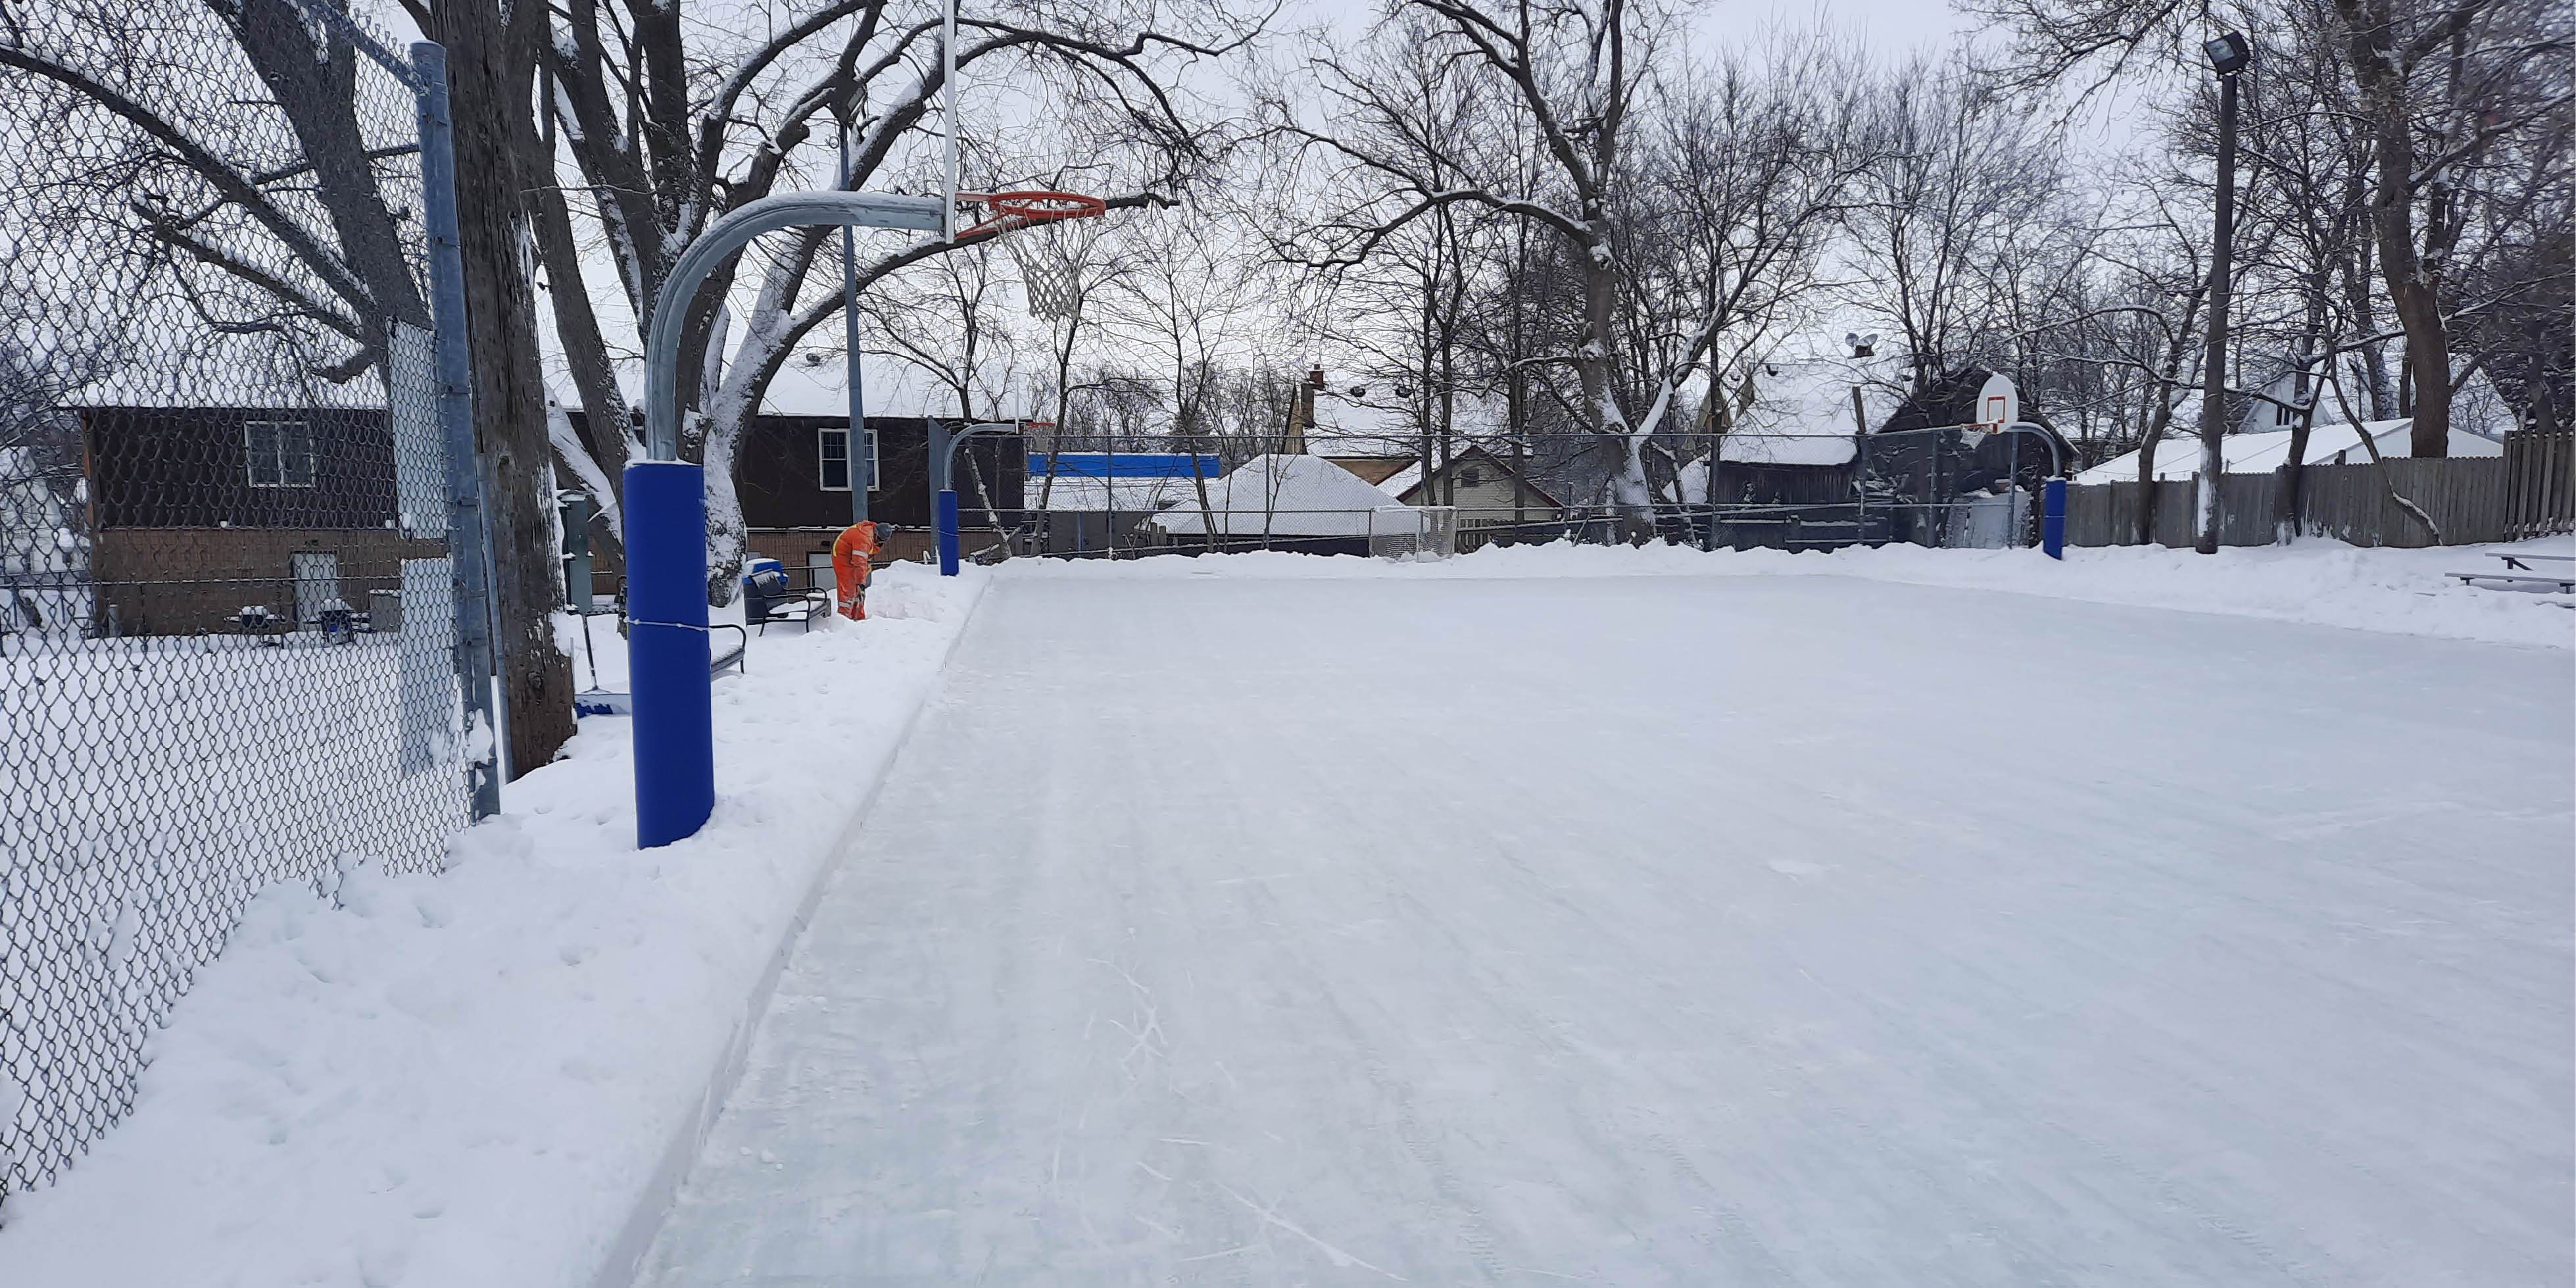 Outdoor skating rink on basketball court